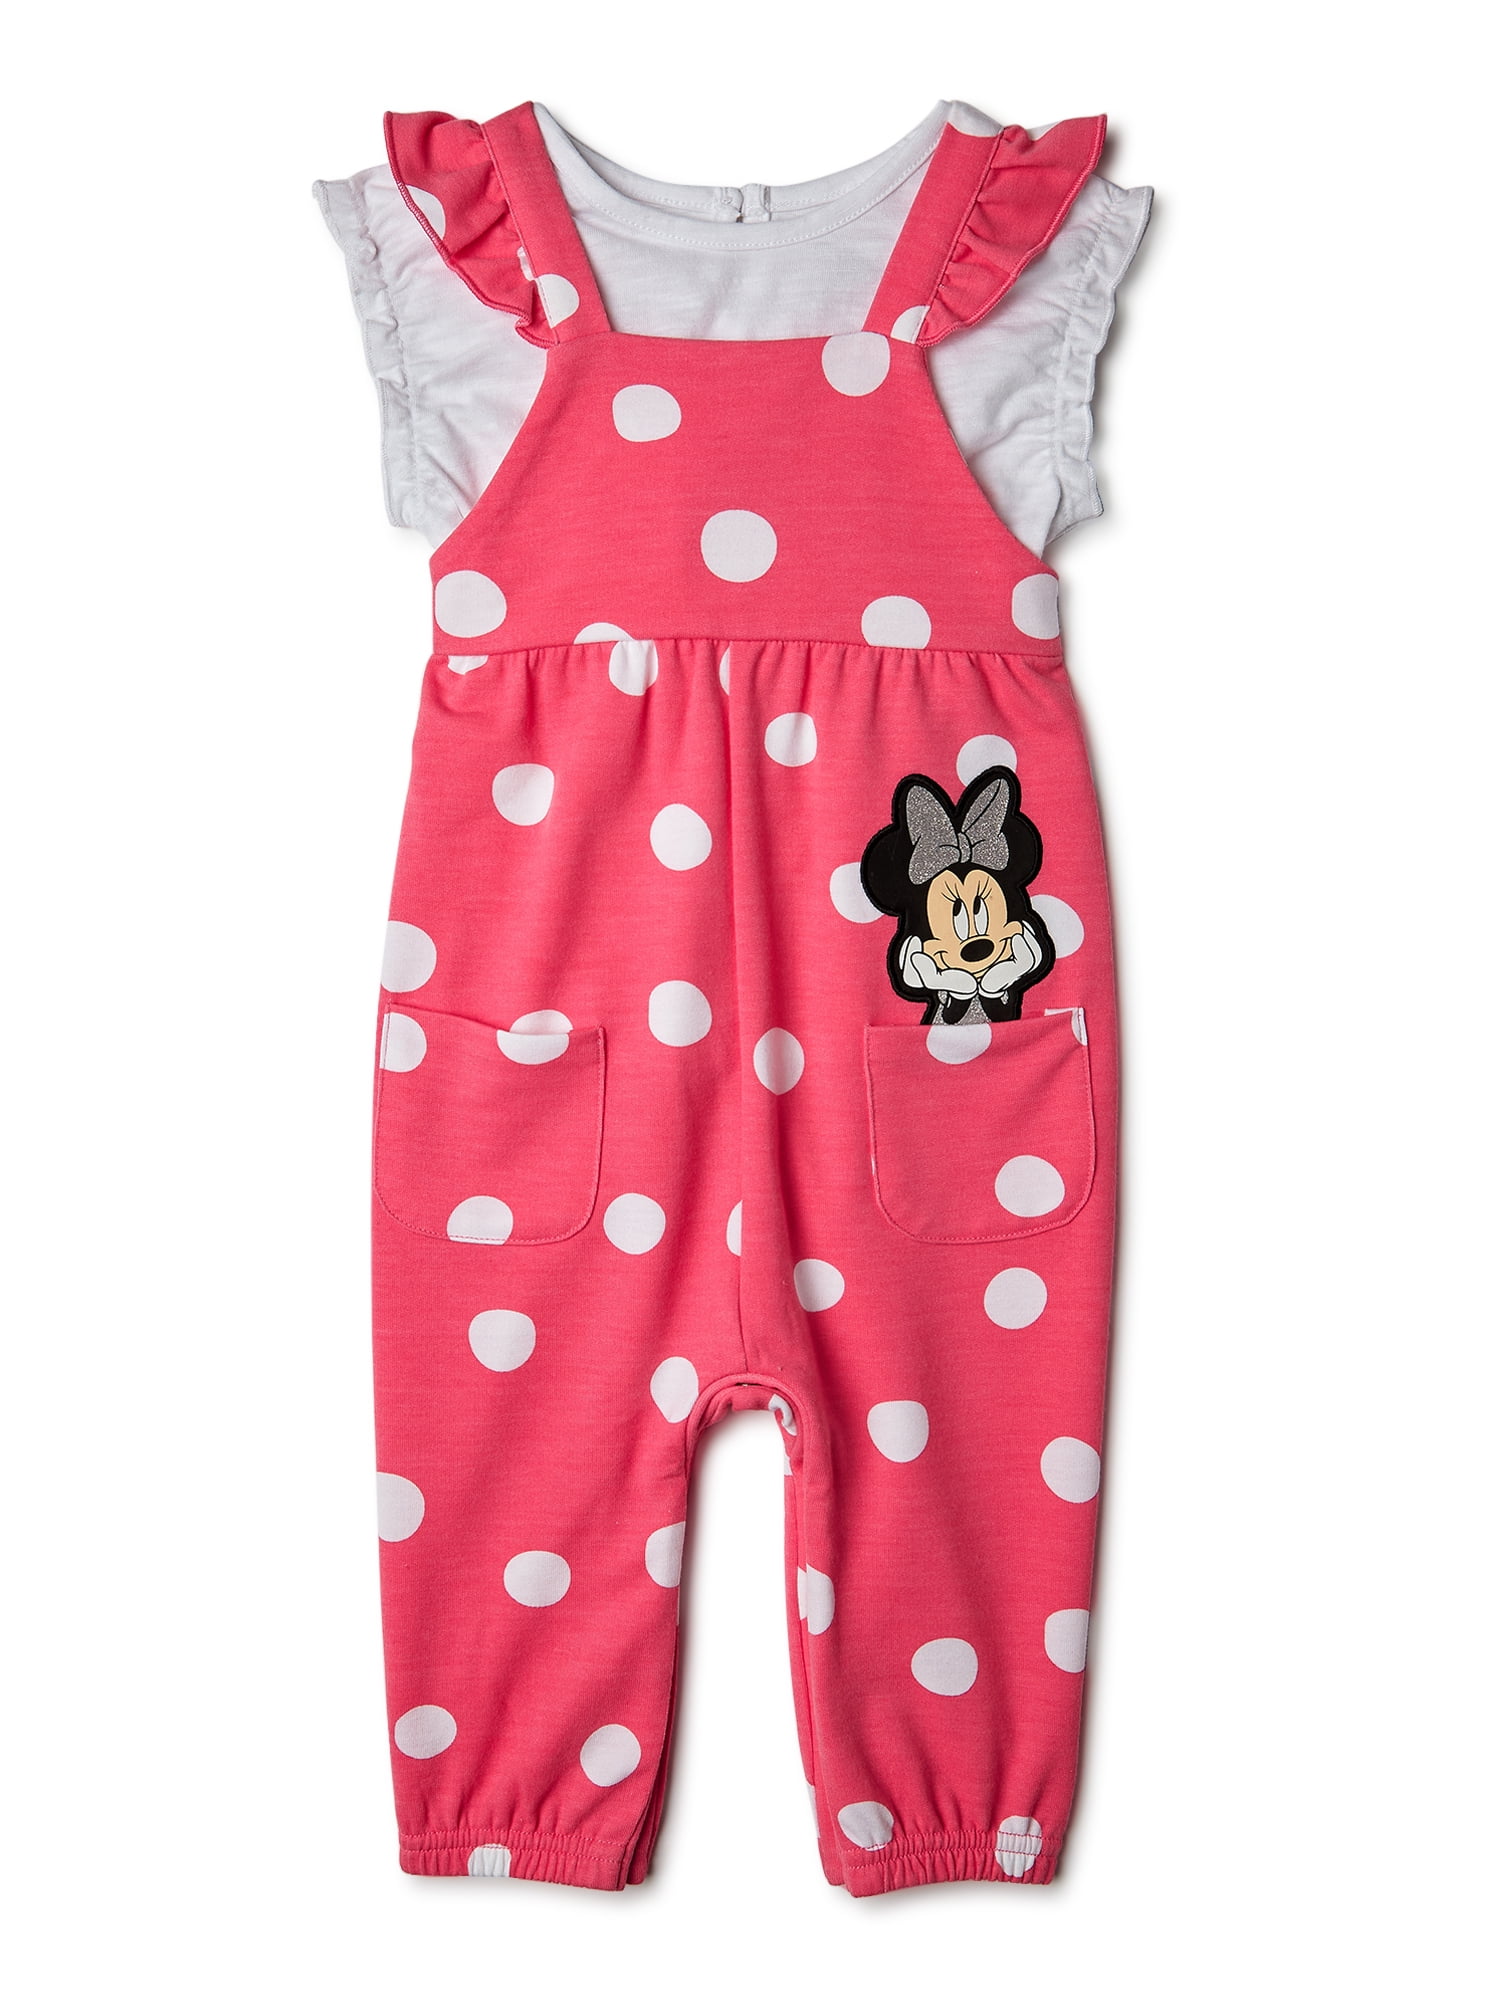 Baby Girls Pink Minnie Mouse  Romper/Playsuit  3-6 Months 